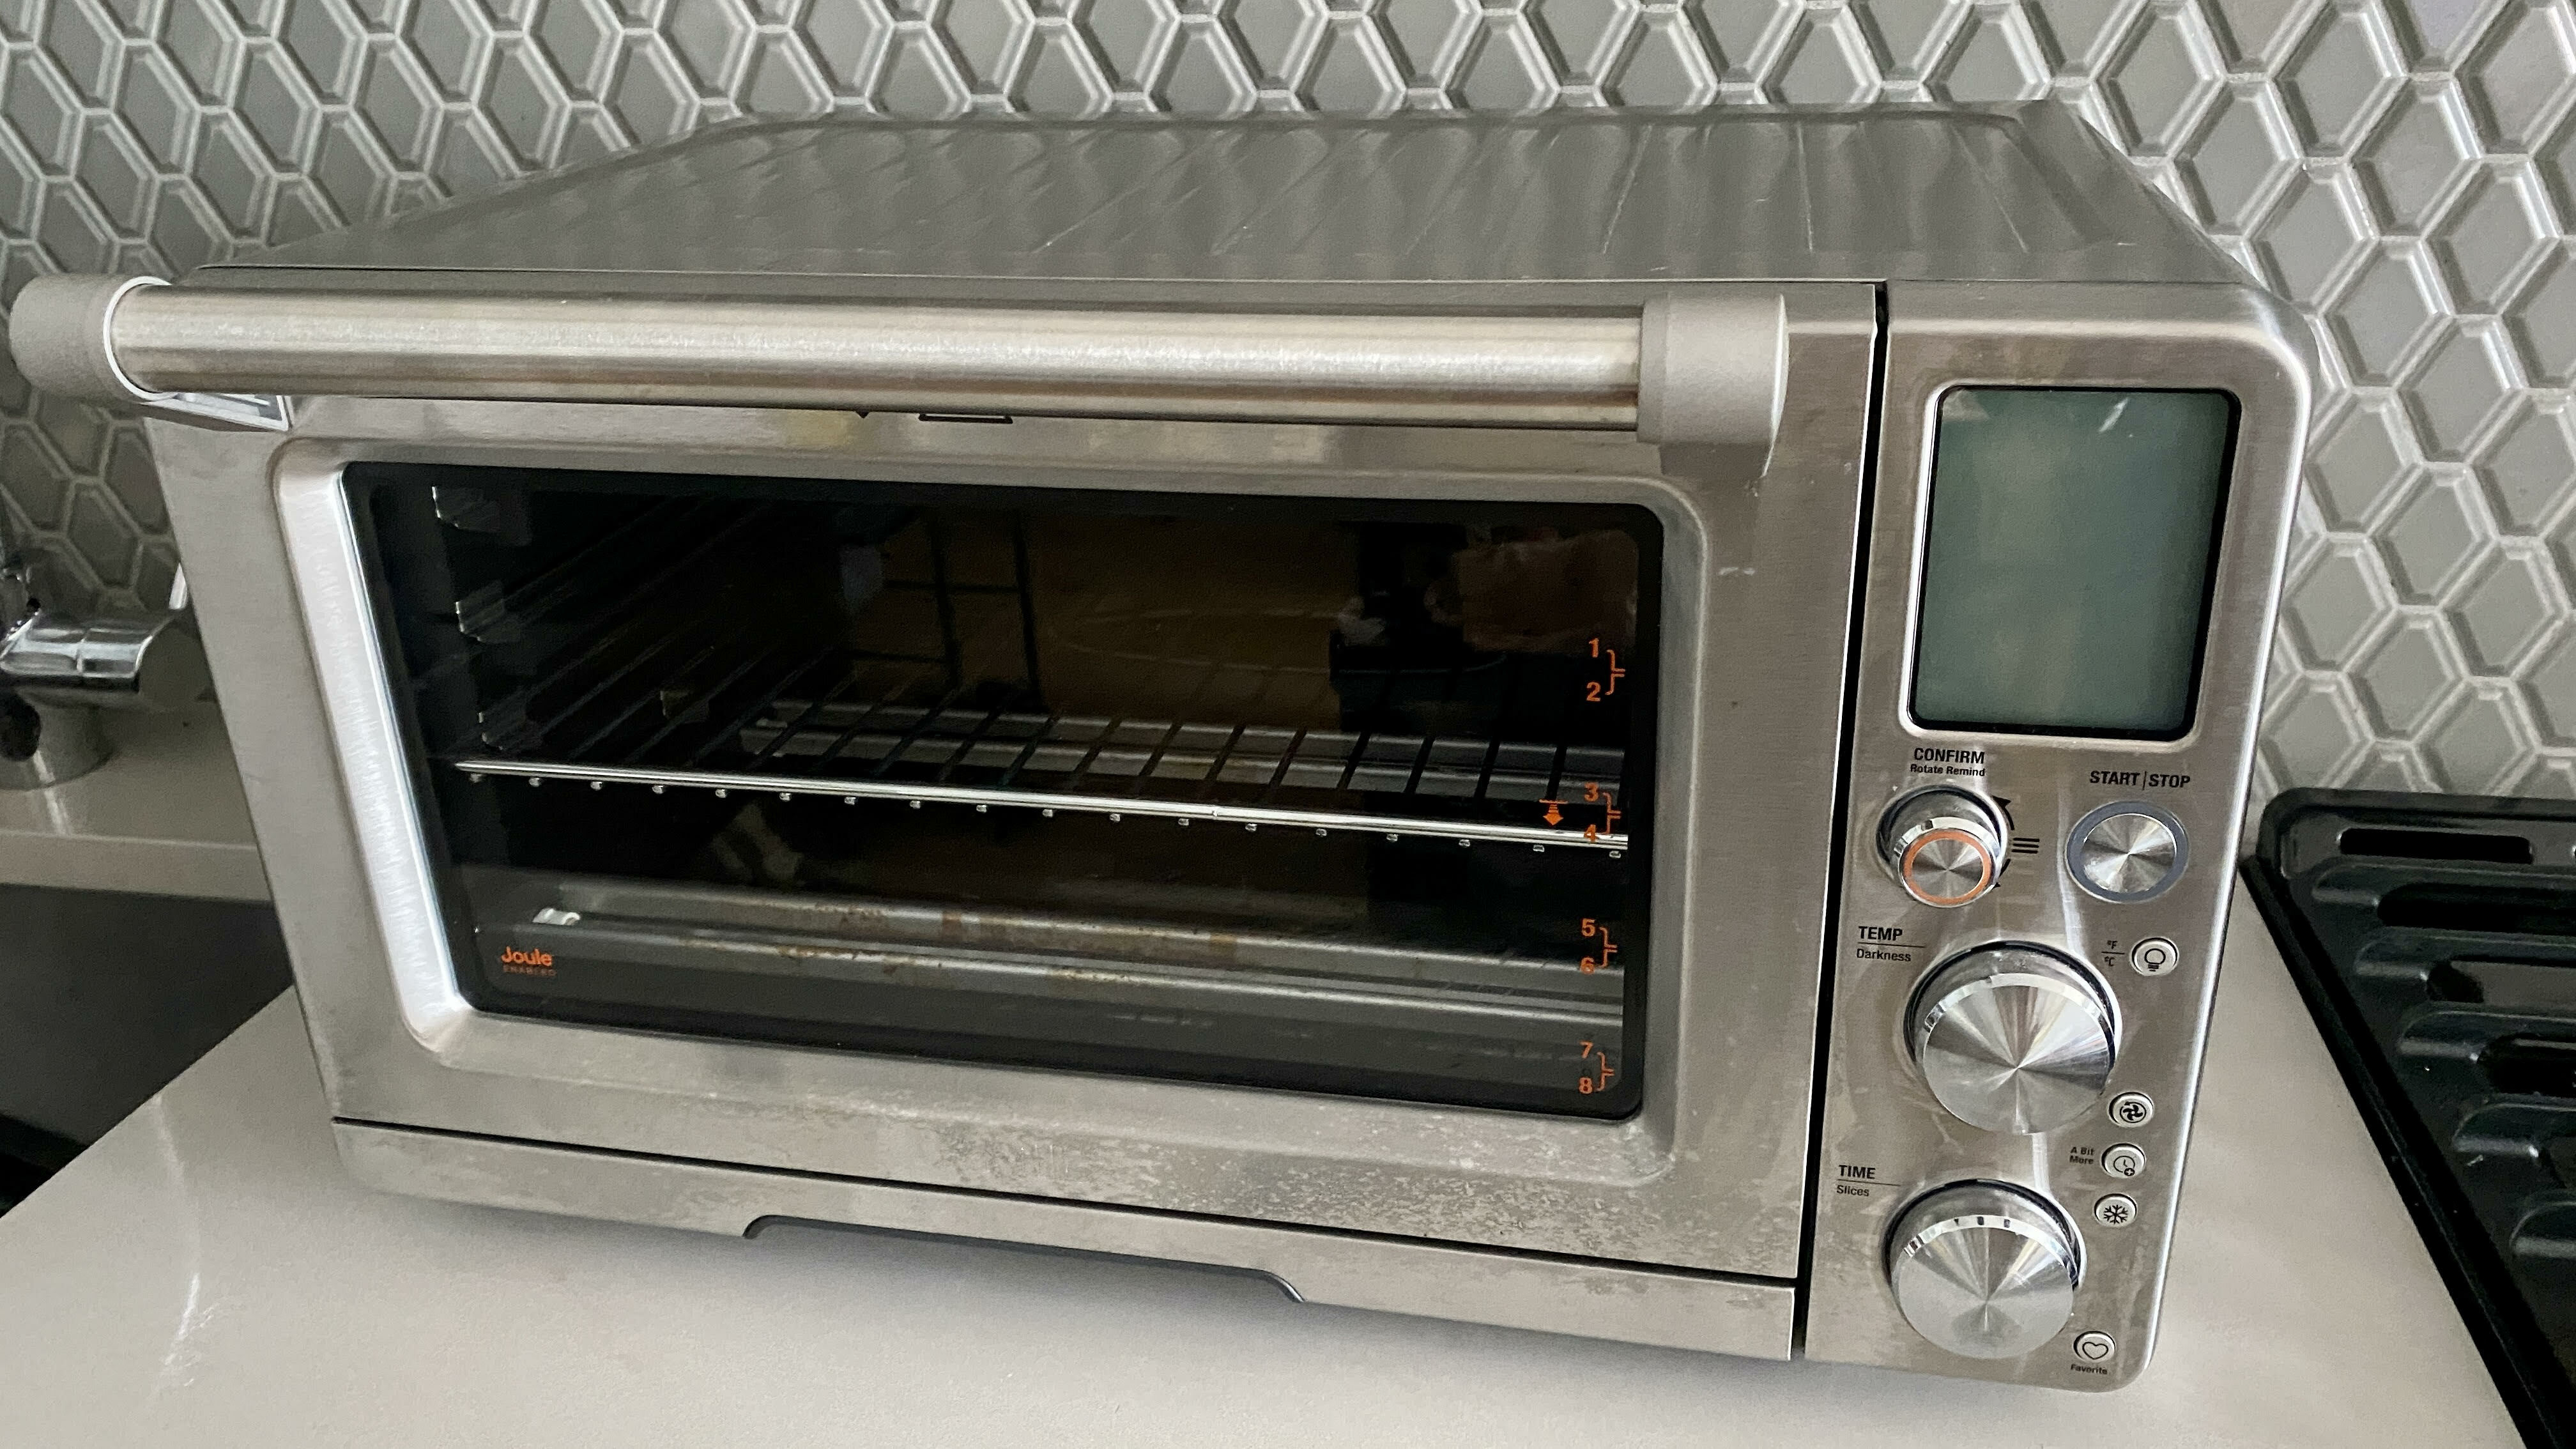 silver Breville toaster oven